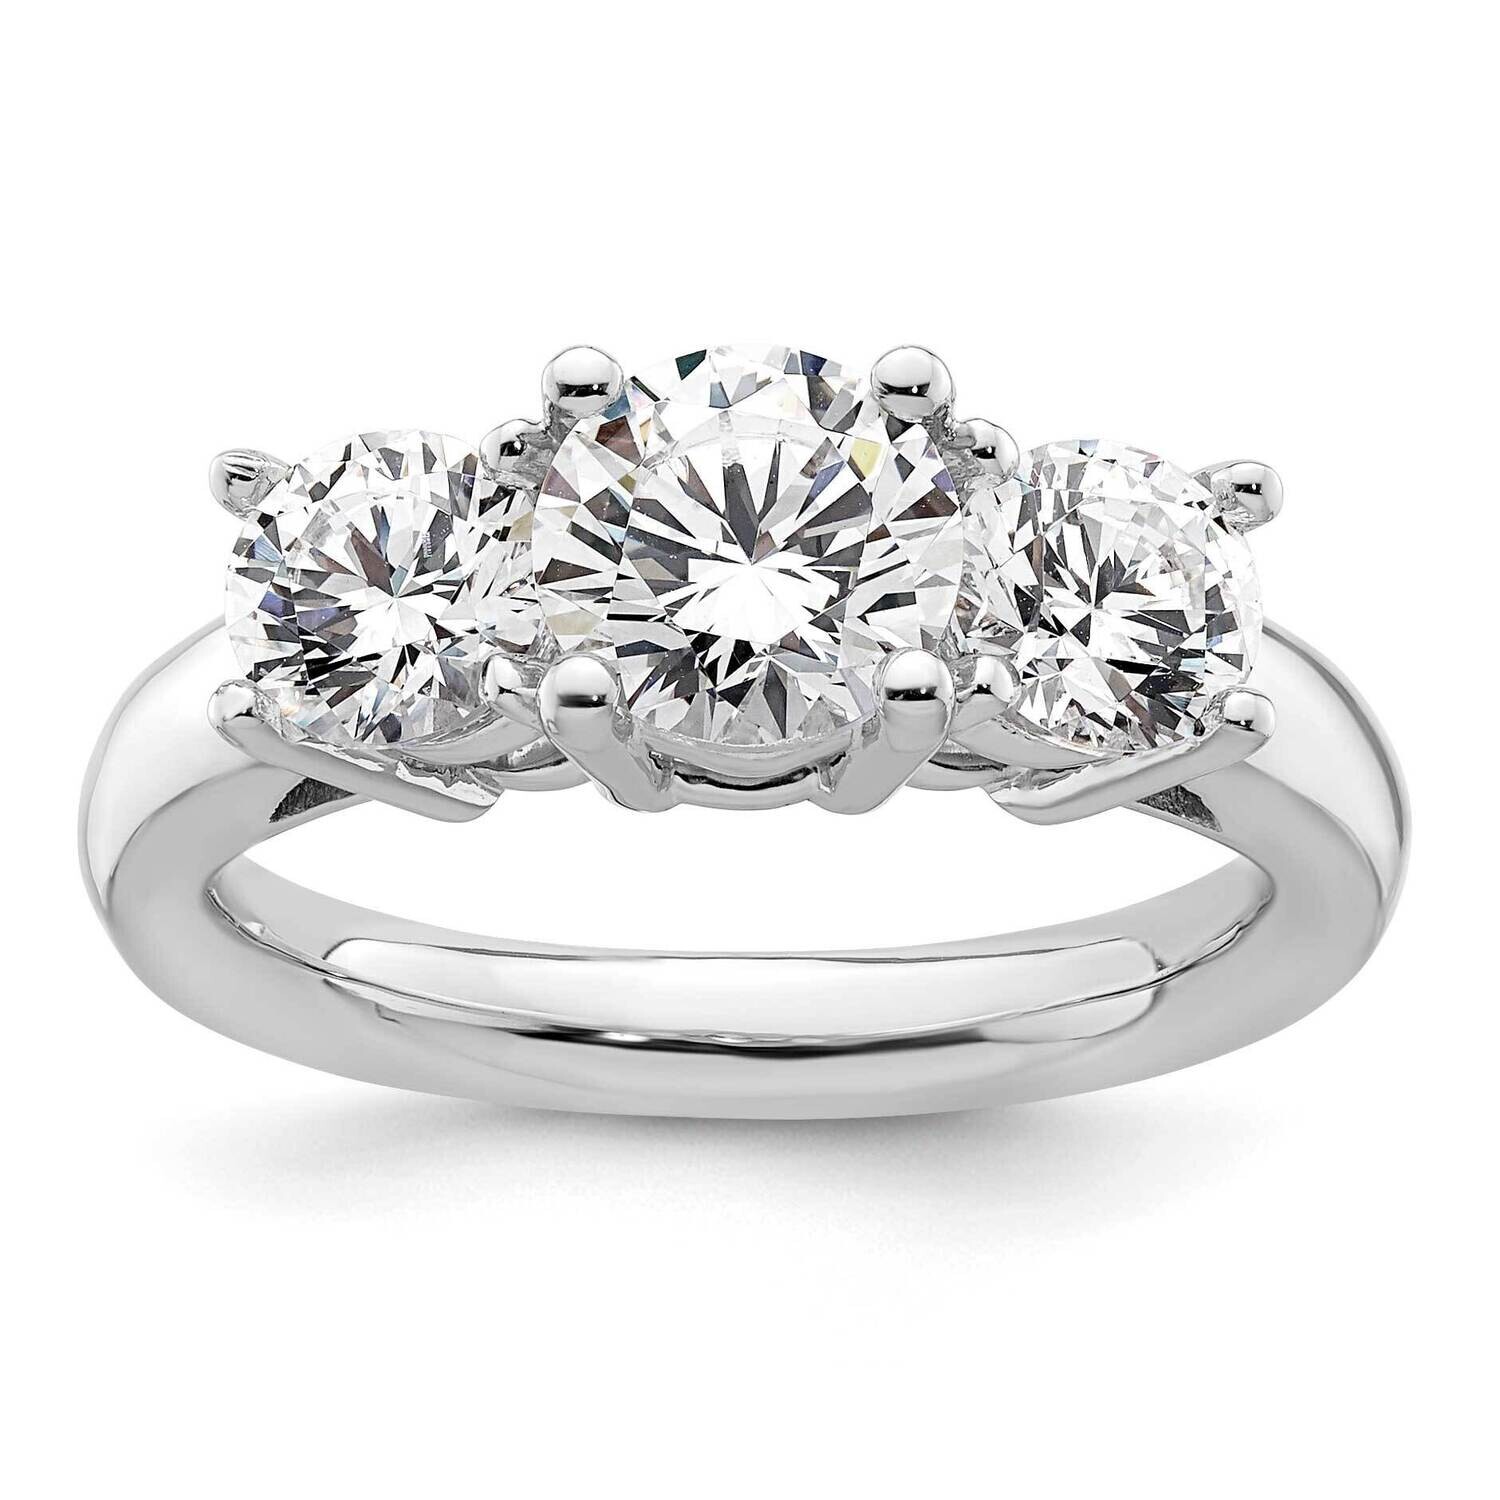 3-Stone Holds 1.25 Carat 7.00mm Round Center 2-5.5mm Round Sides Engagement Ring Mounting 14k White Gold RM2950E-125-CWAA